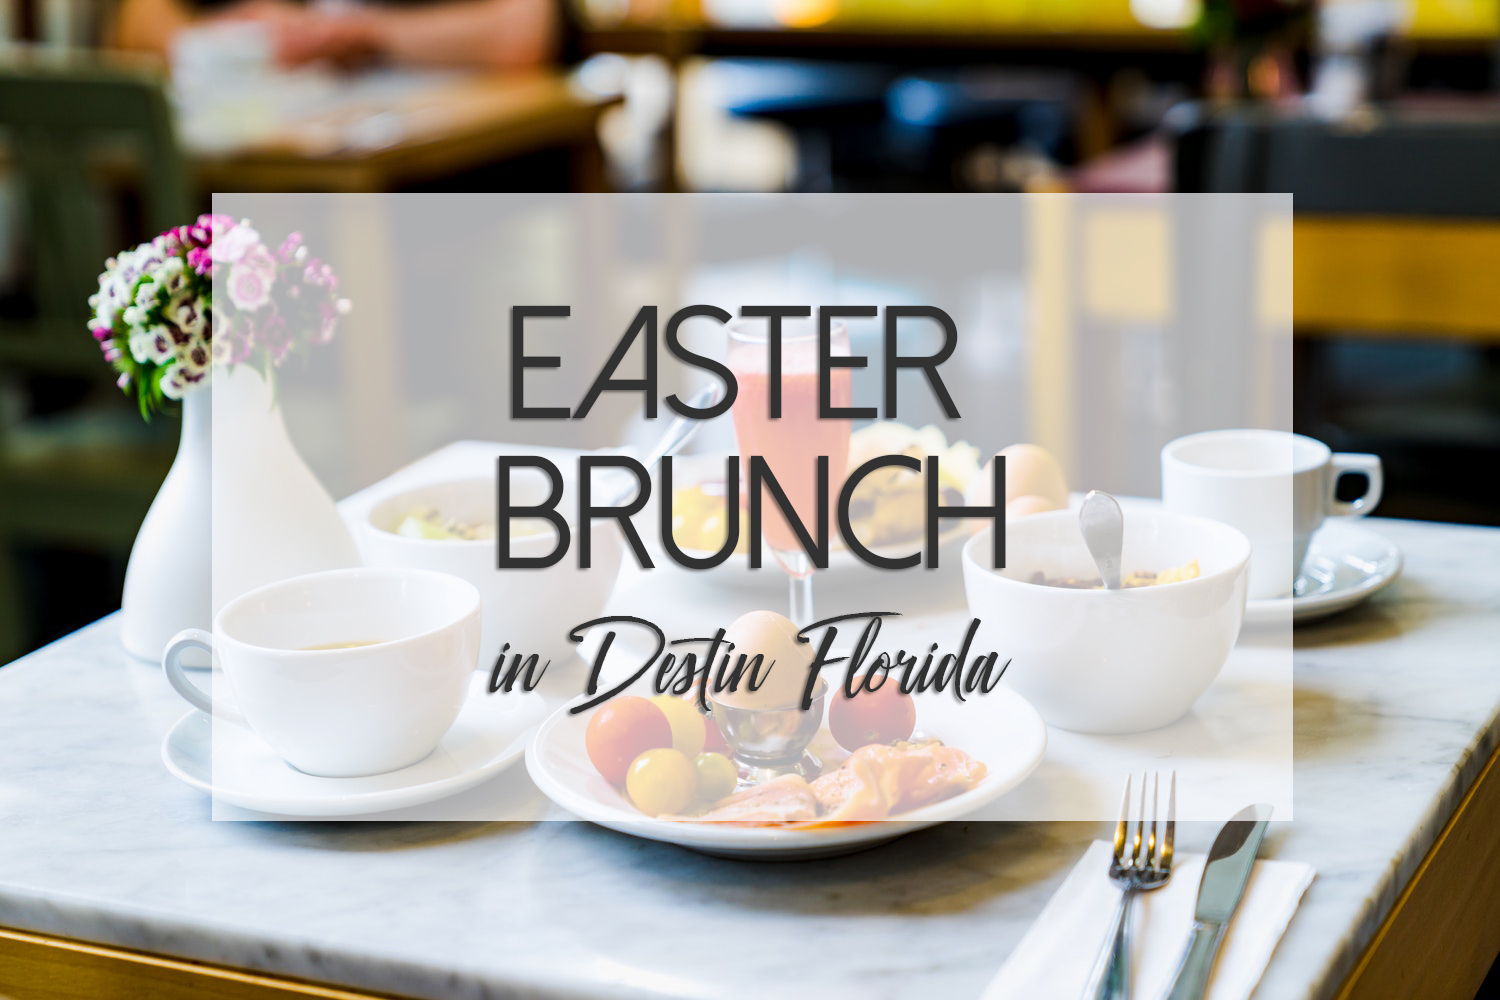 Easter Brunch in Destin Florida Find Things To Do in Destin